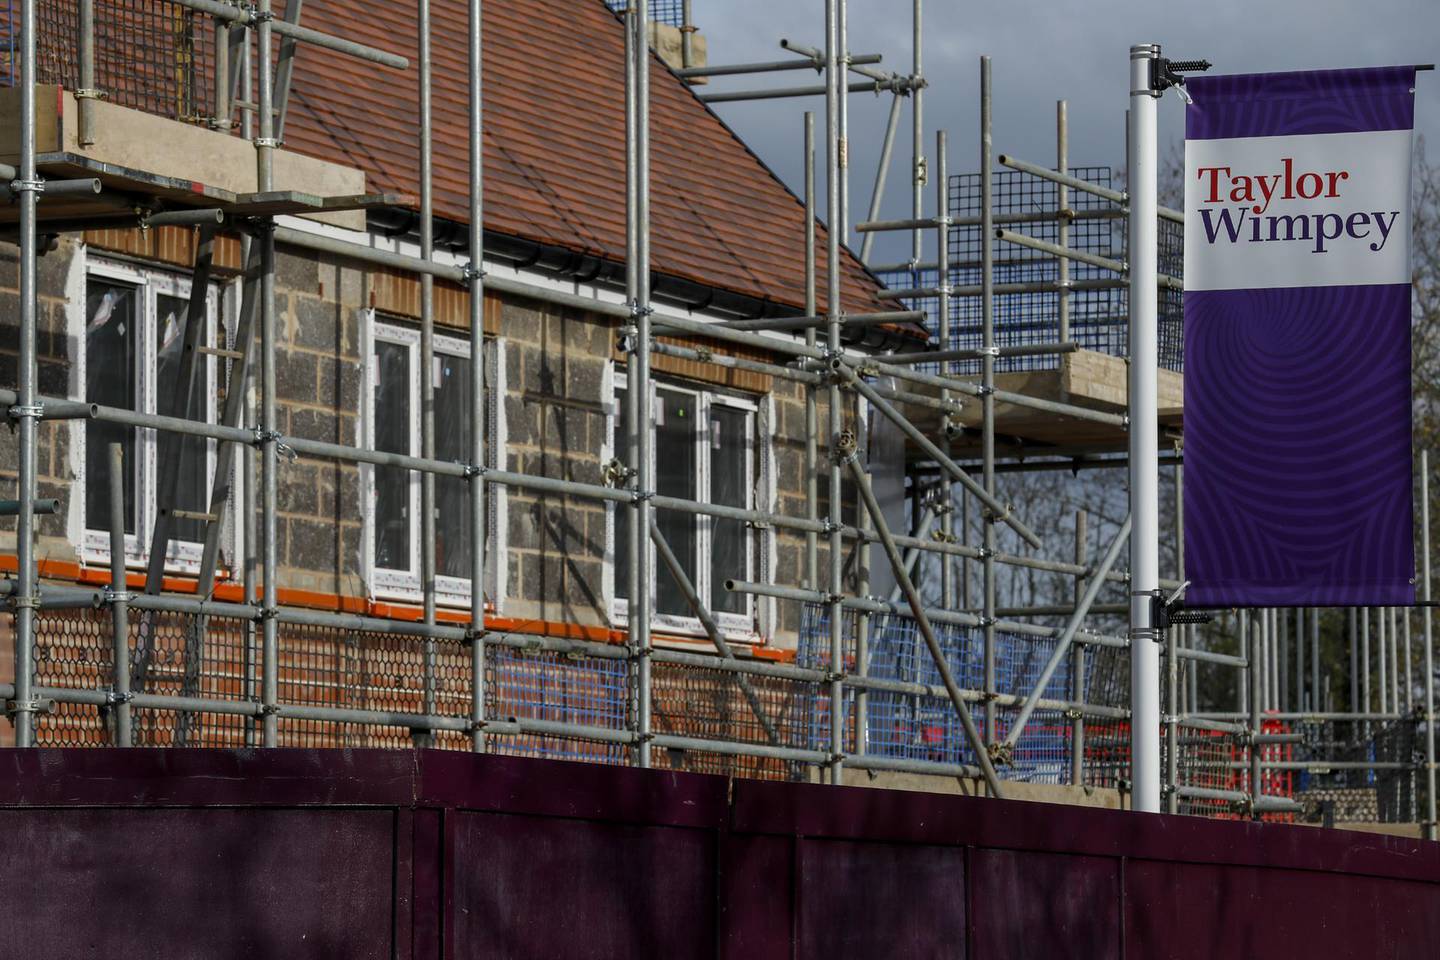 A sign bearing the Taylor Wimpey Plc logo stands near scaffolding surround a new housing development at Worplesdon, near Guildford, U.K., on Wednesday, Nov. 20, 2019. The U.K. still suffers from an imbalance between the demand for housing and the volume of new houses being built, so any party campaigning for government would likely have to address this as part of their policy platform. Photographer: Luke MacGregor/Bloomberg